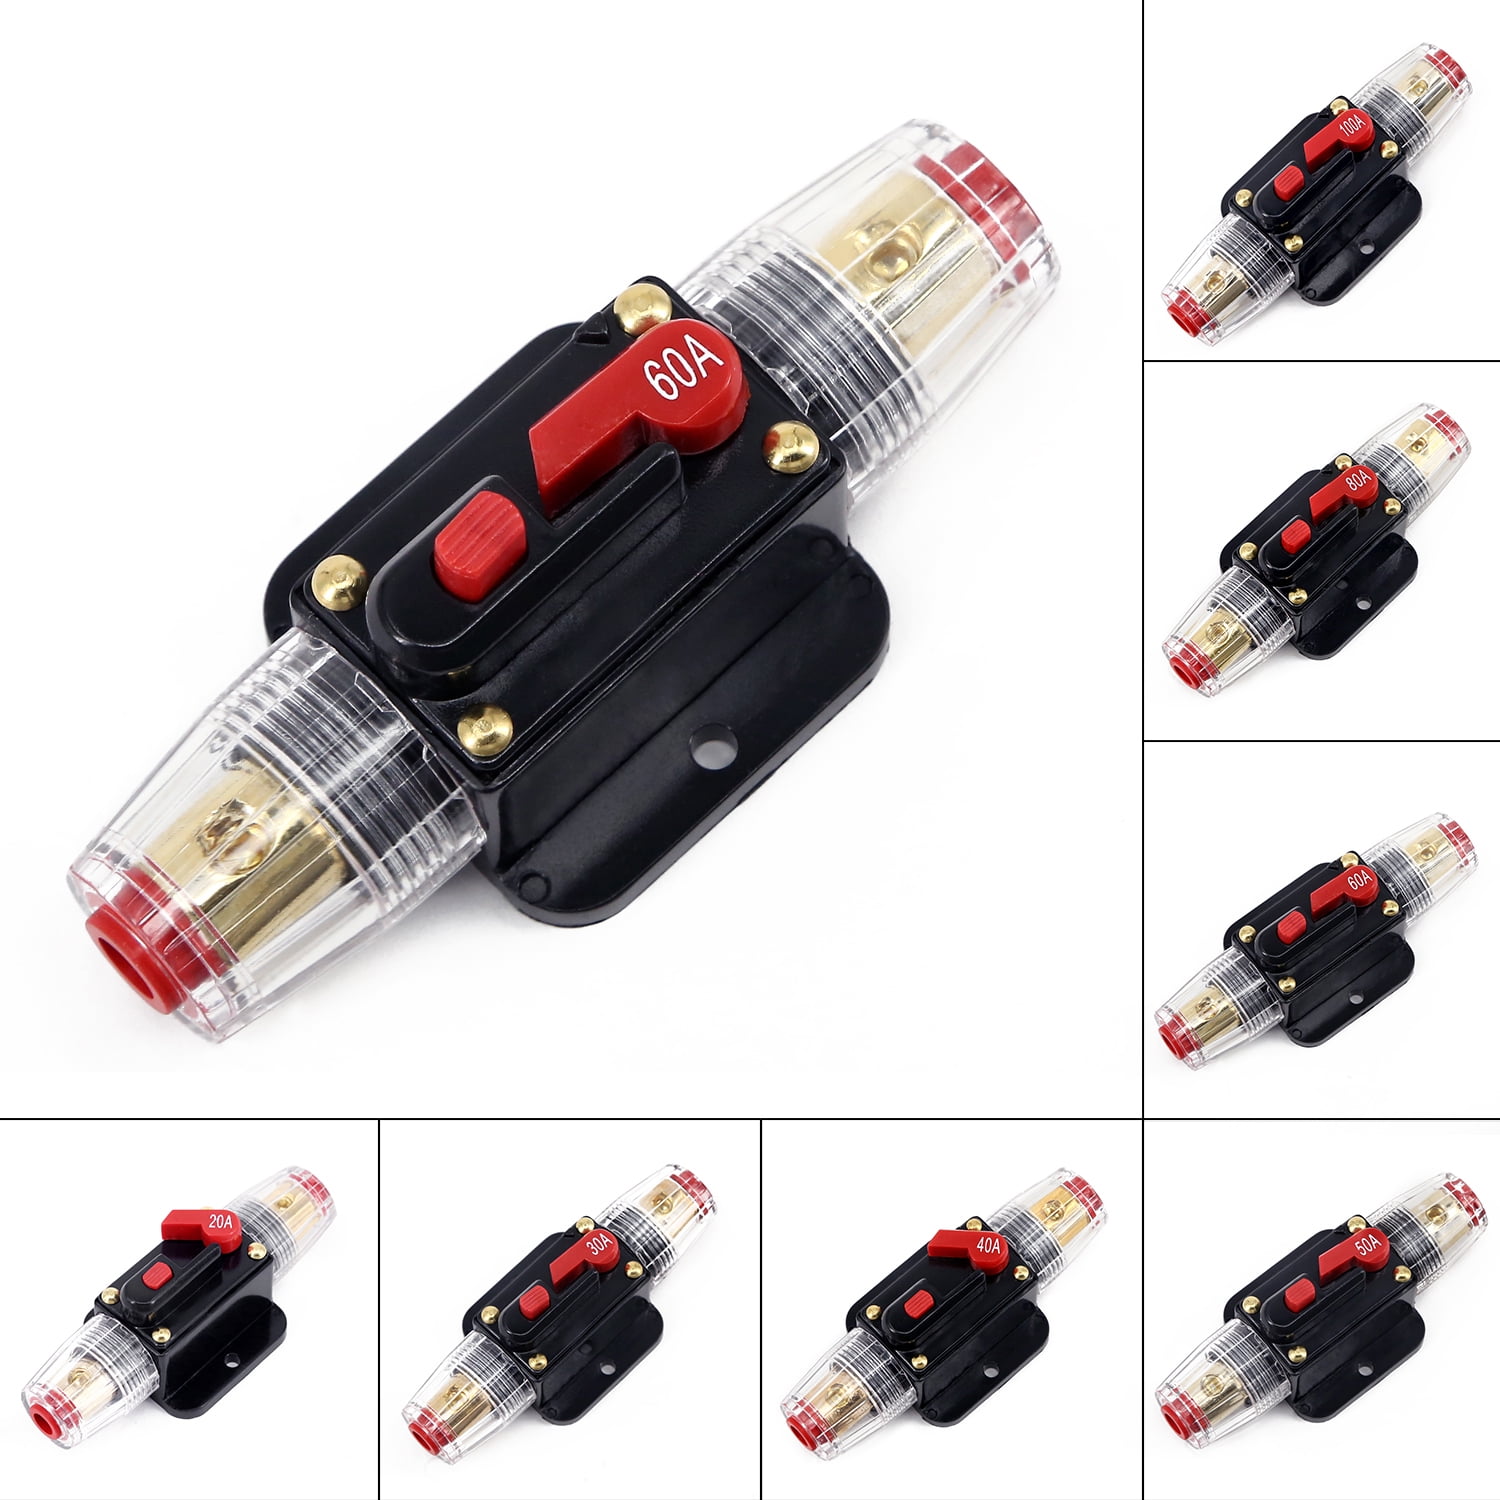 Details about  / 20A-100A AMP Circuit Breaker Car Marine Stereo Audio Inline Replace Fuse DC 12V